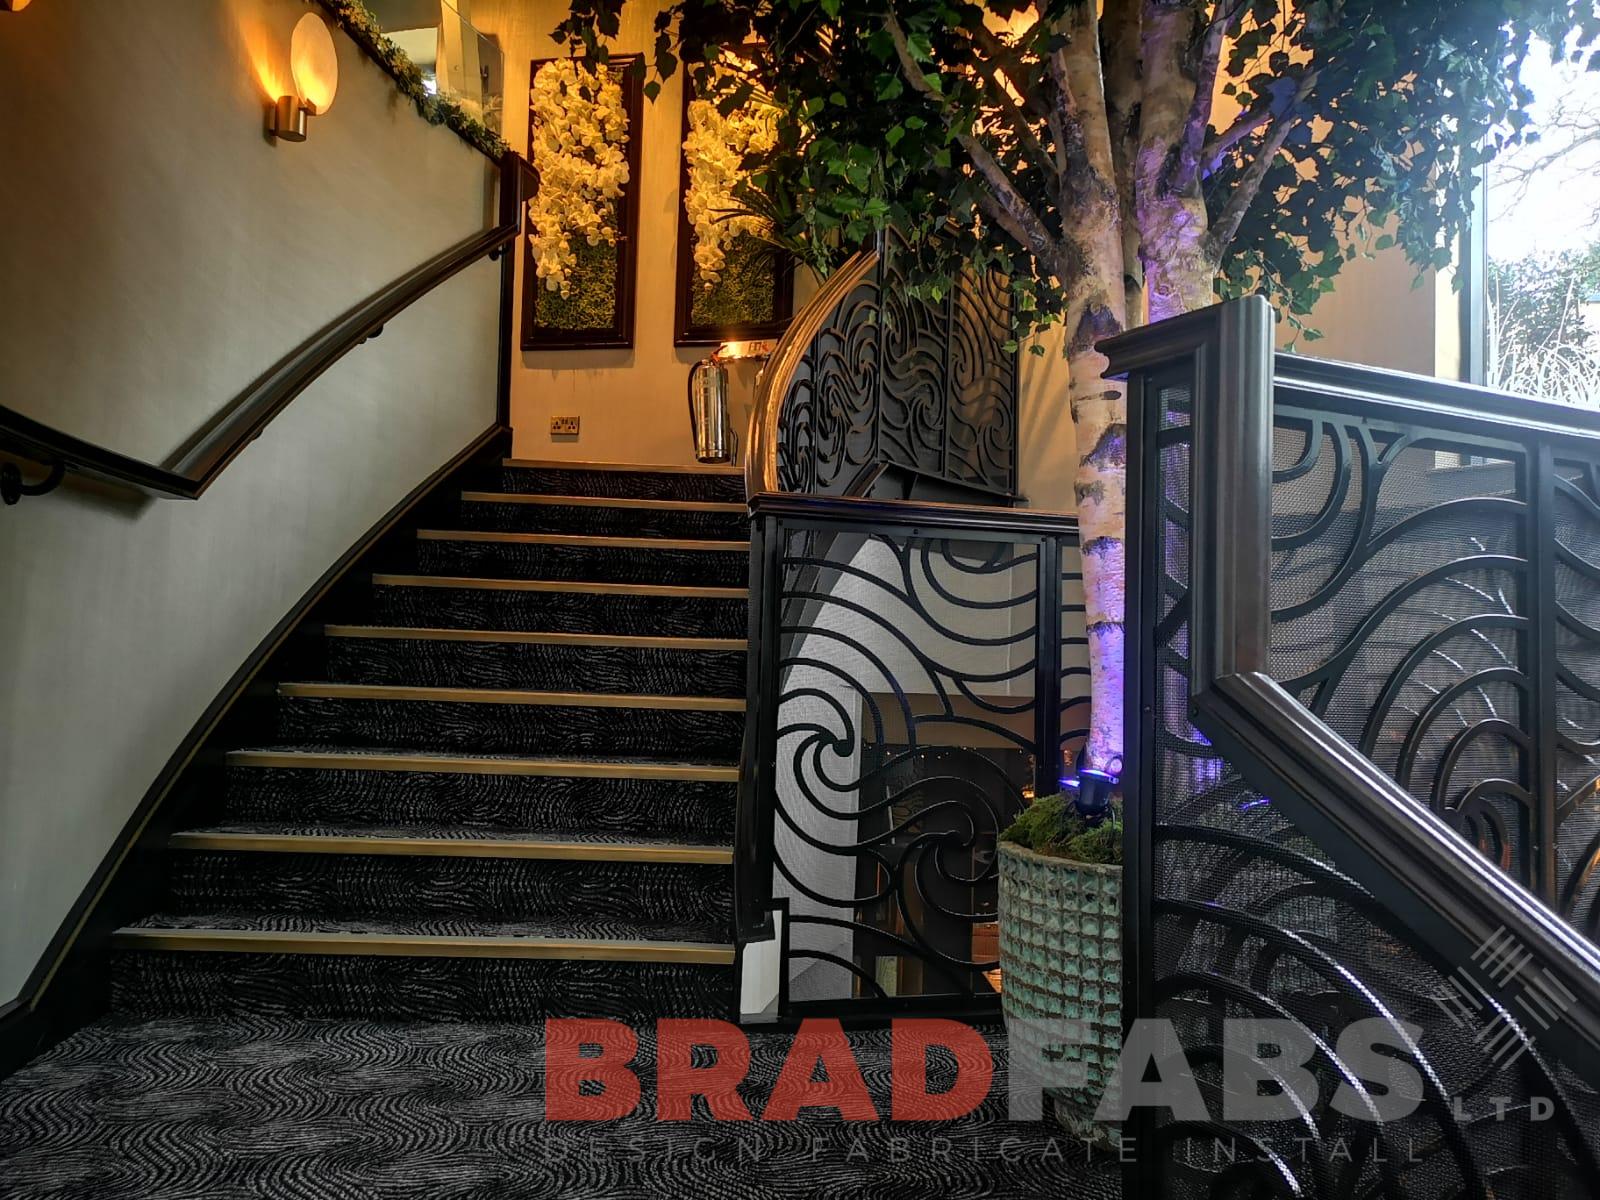 Curved helical staircase with ornate balustrade by Bradfabs UK